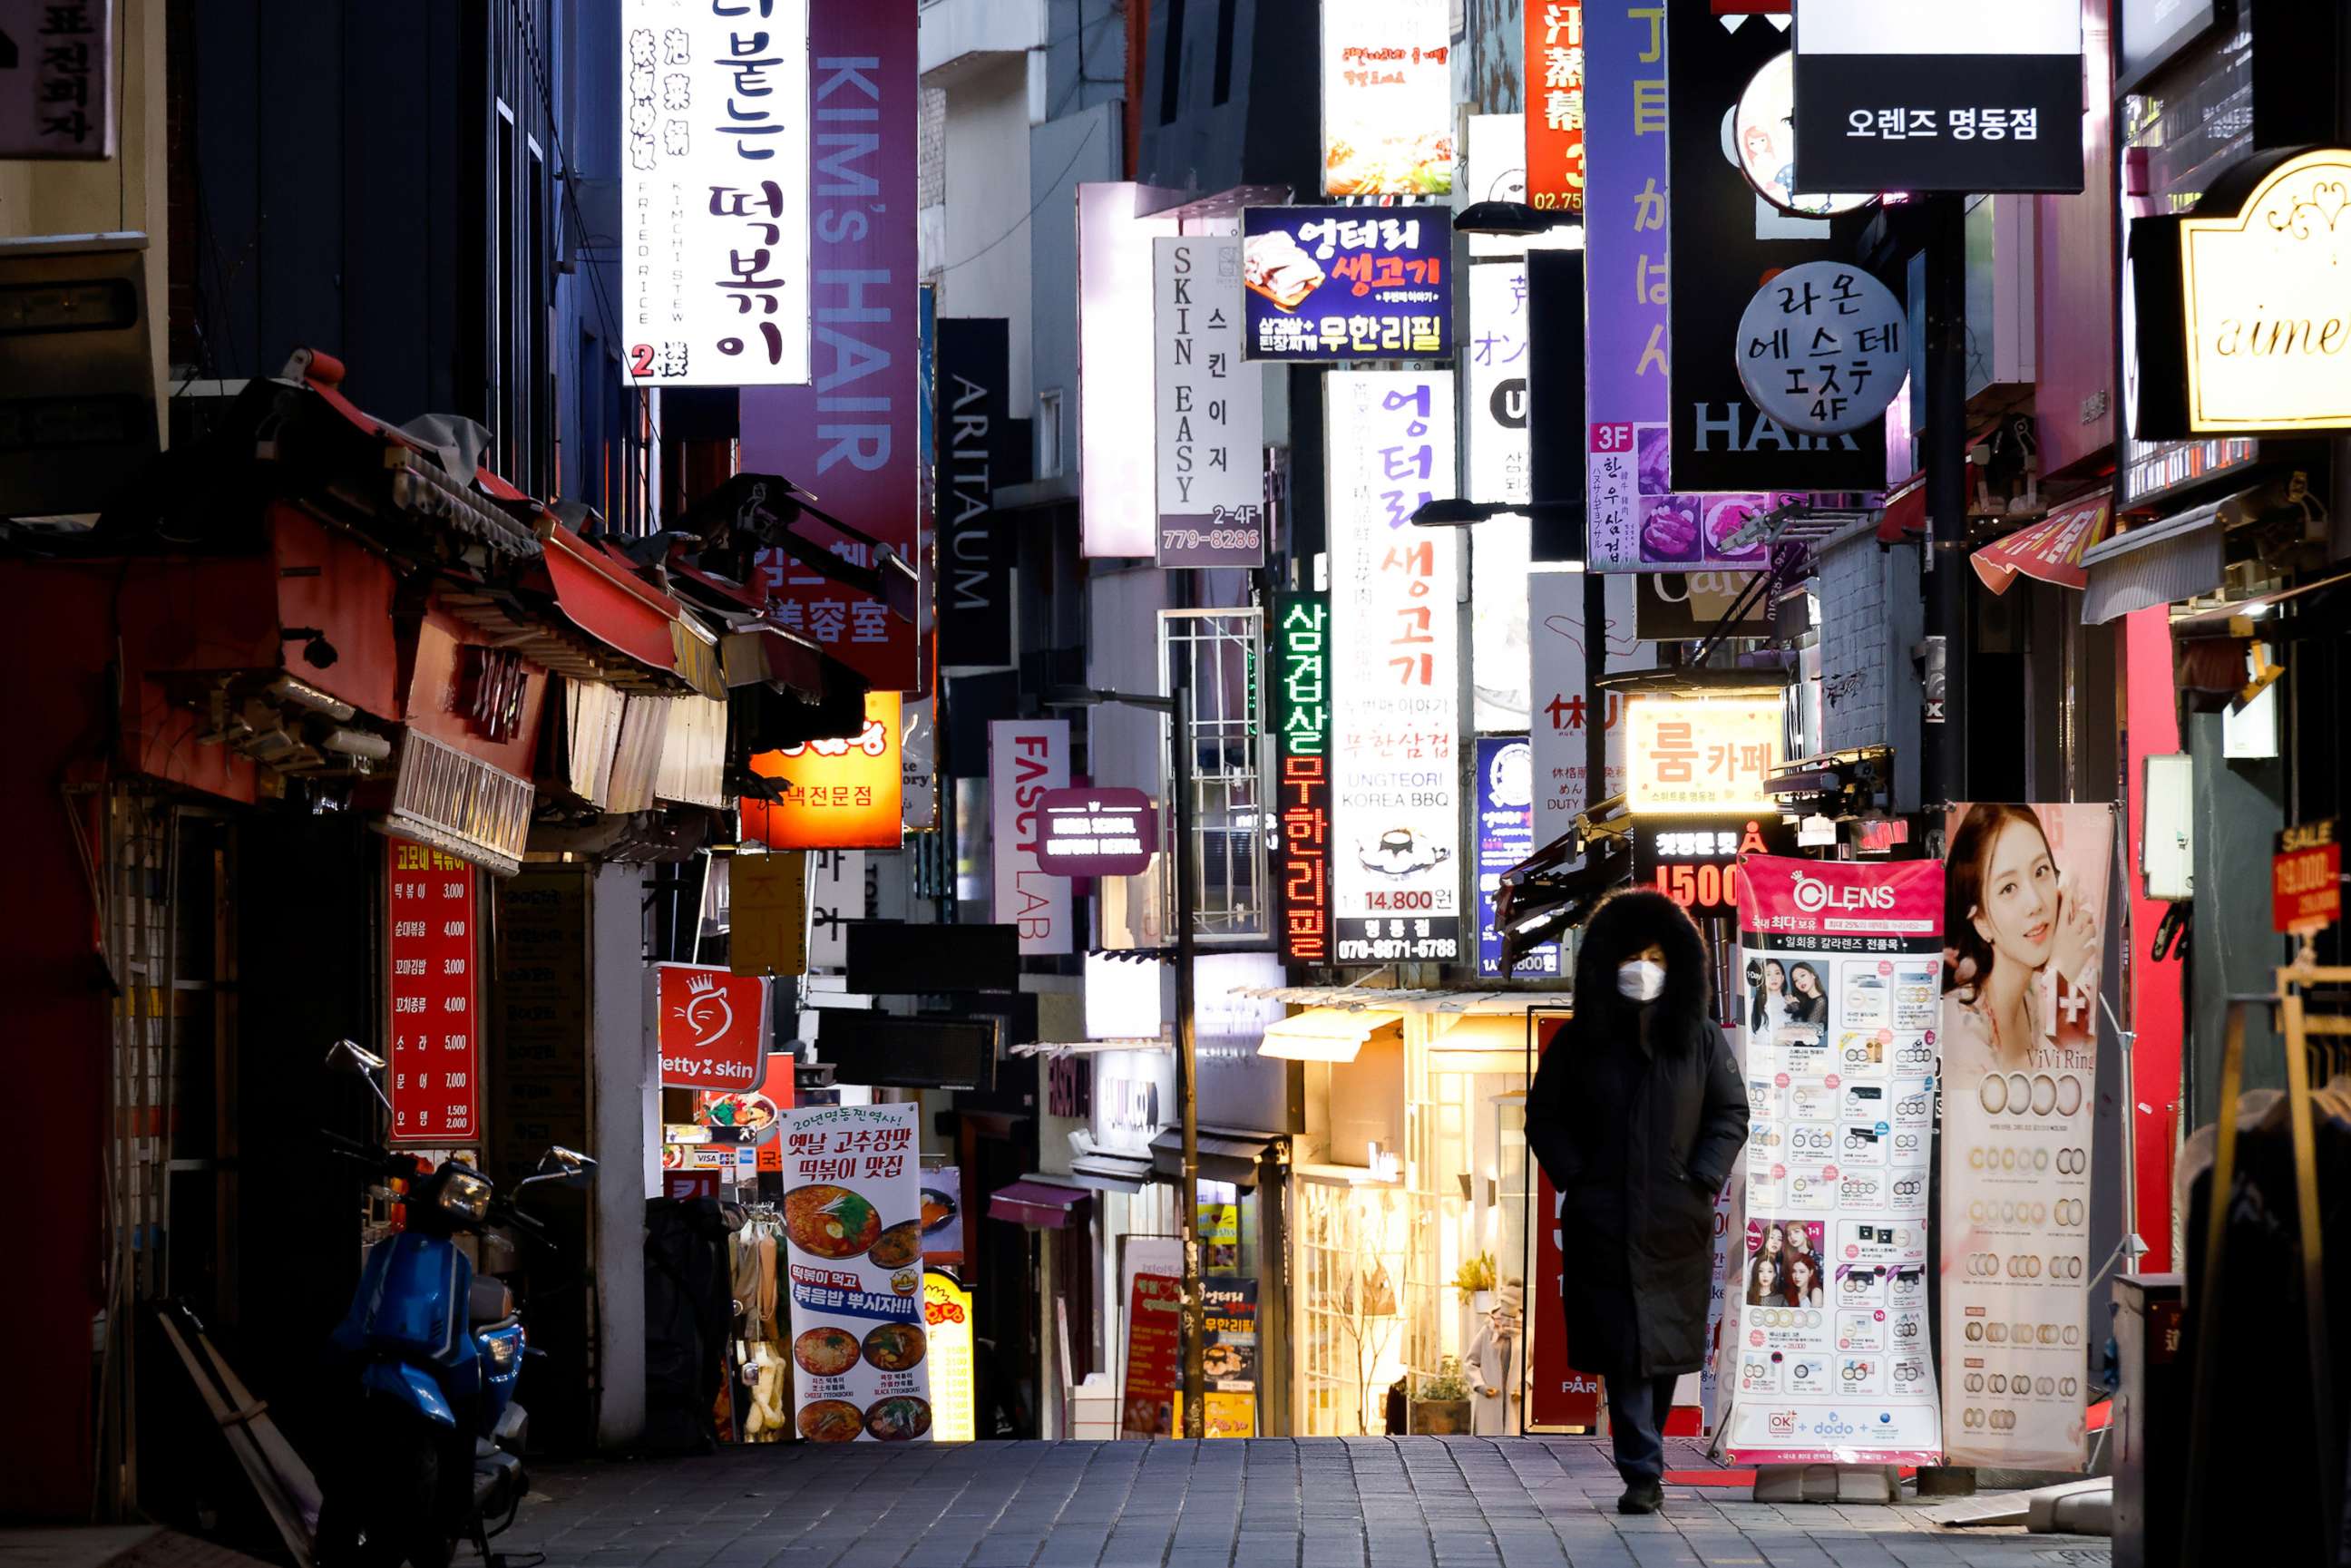 PHOTO: A previously crowded shopping street is nearly empty after heightened social distancing rules were enforced amid the COVID-19 pandemic in Seoul, South Korea, Dec. 8, 2020.